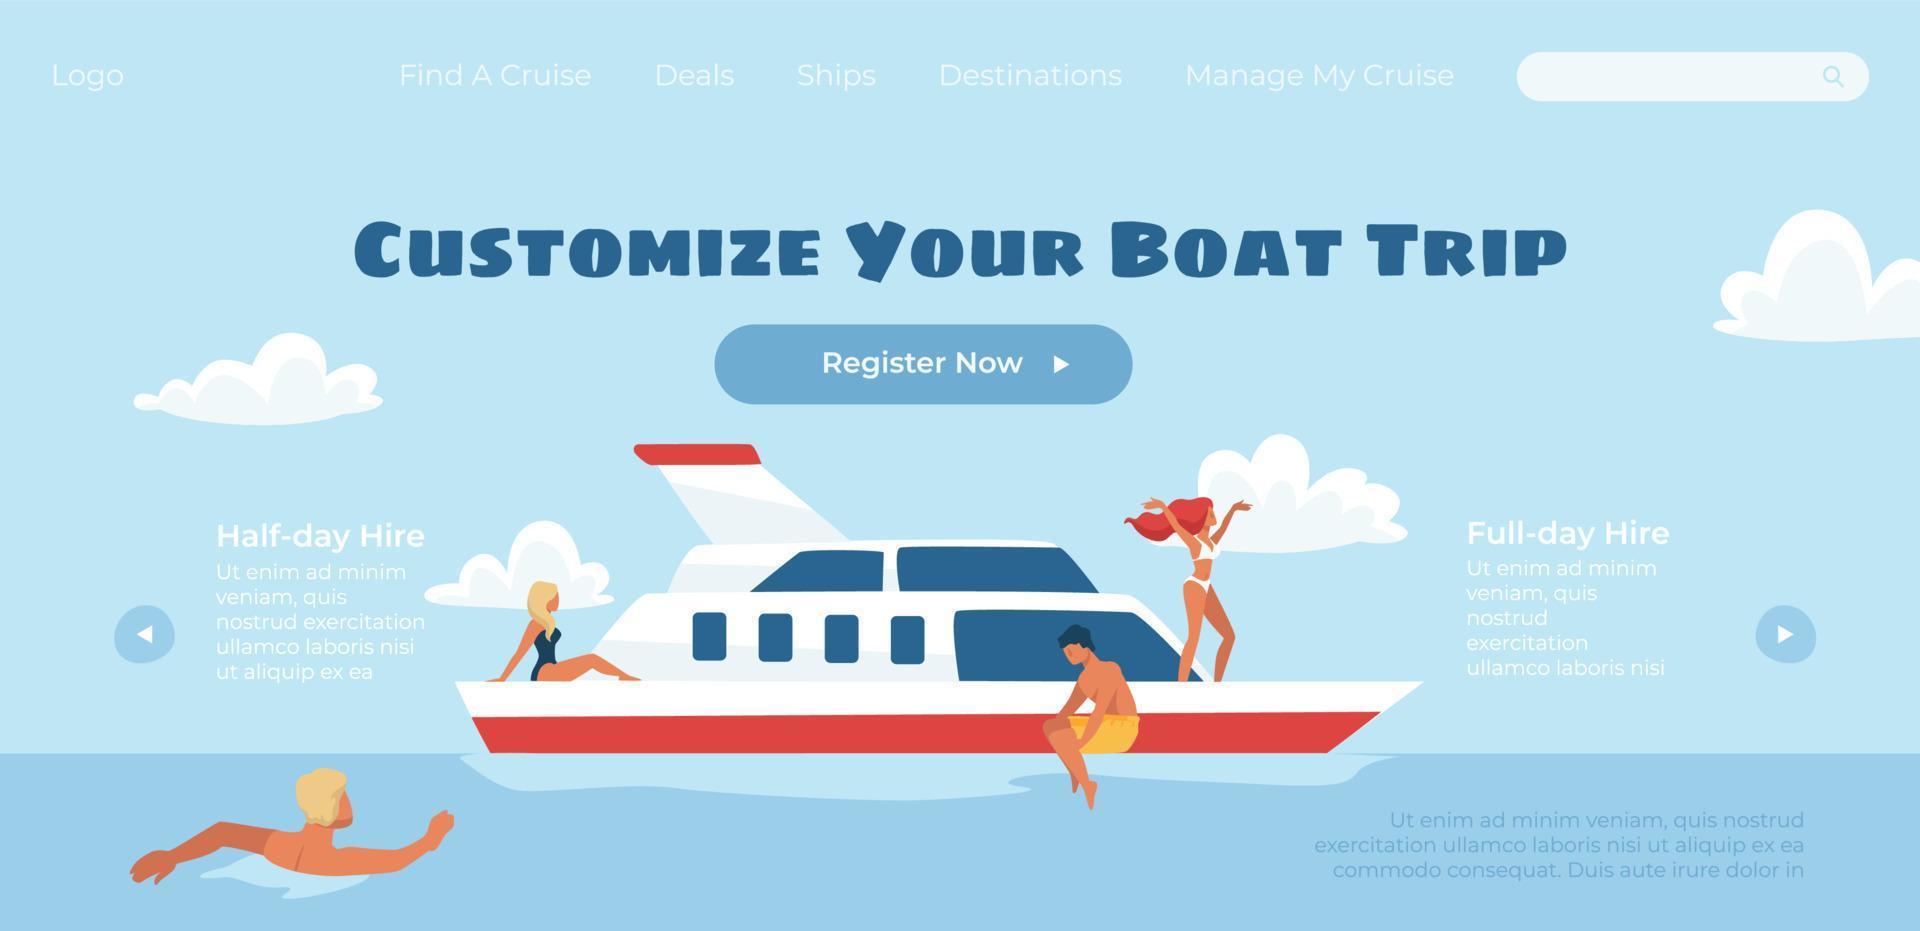 Customize your boat trip, register now on web vector